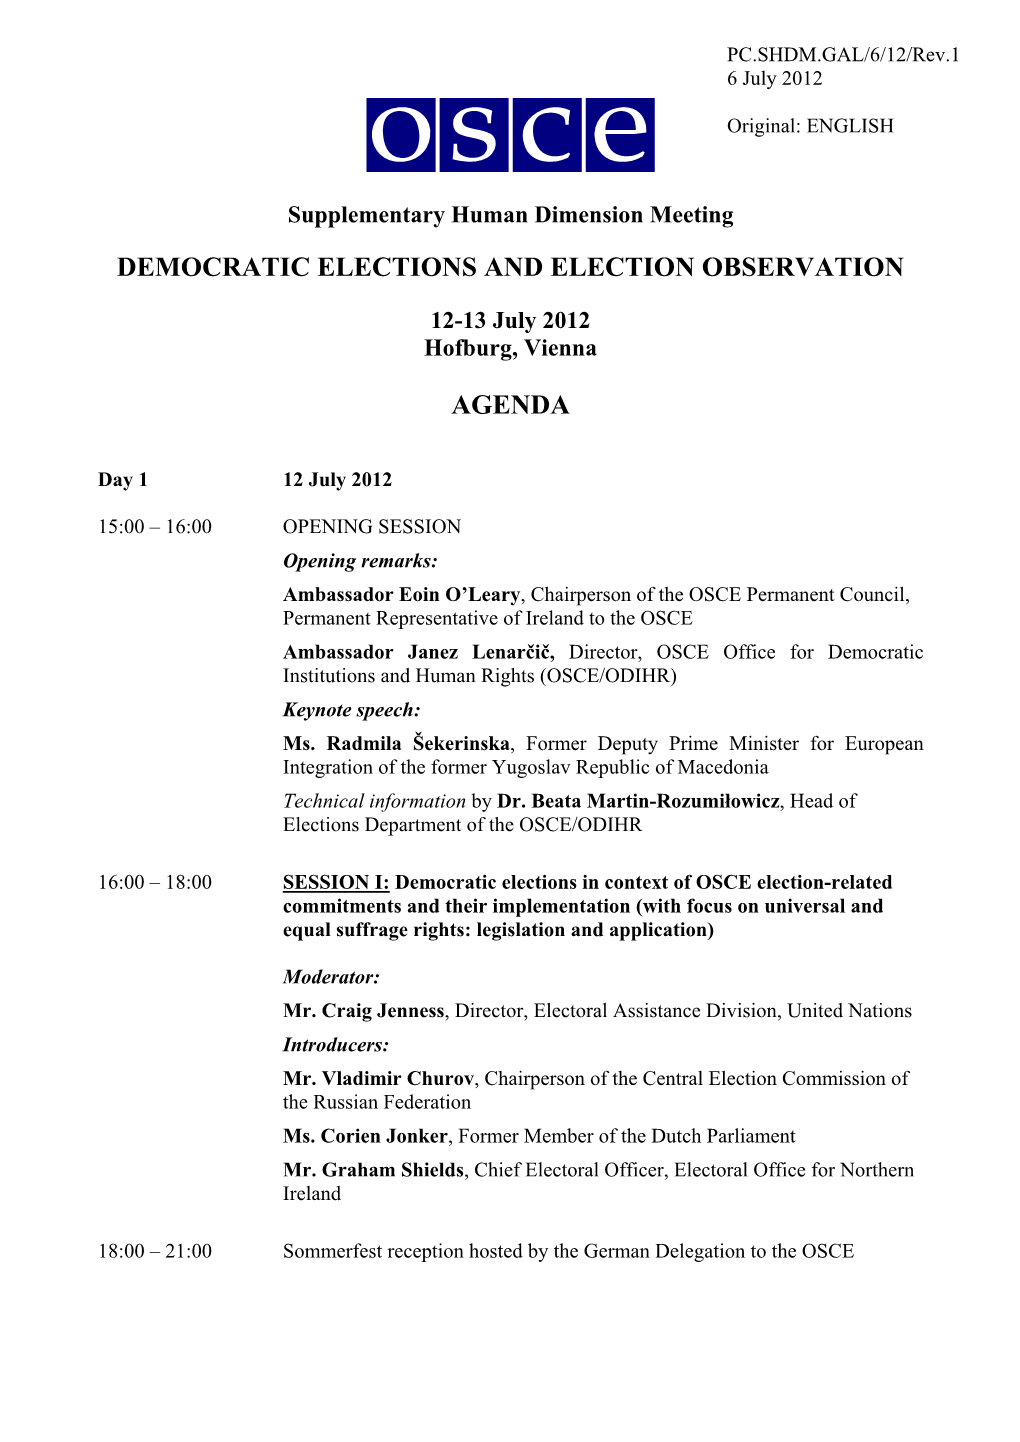 Democratic Elections and Election Observation Agenda